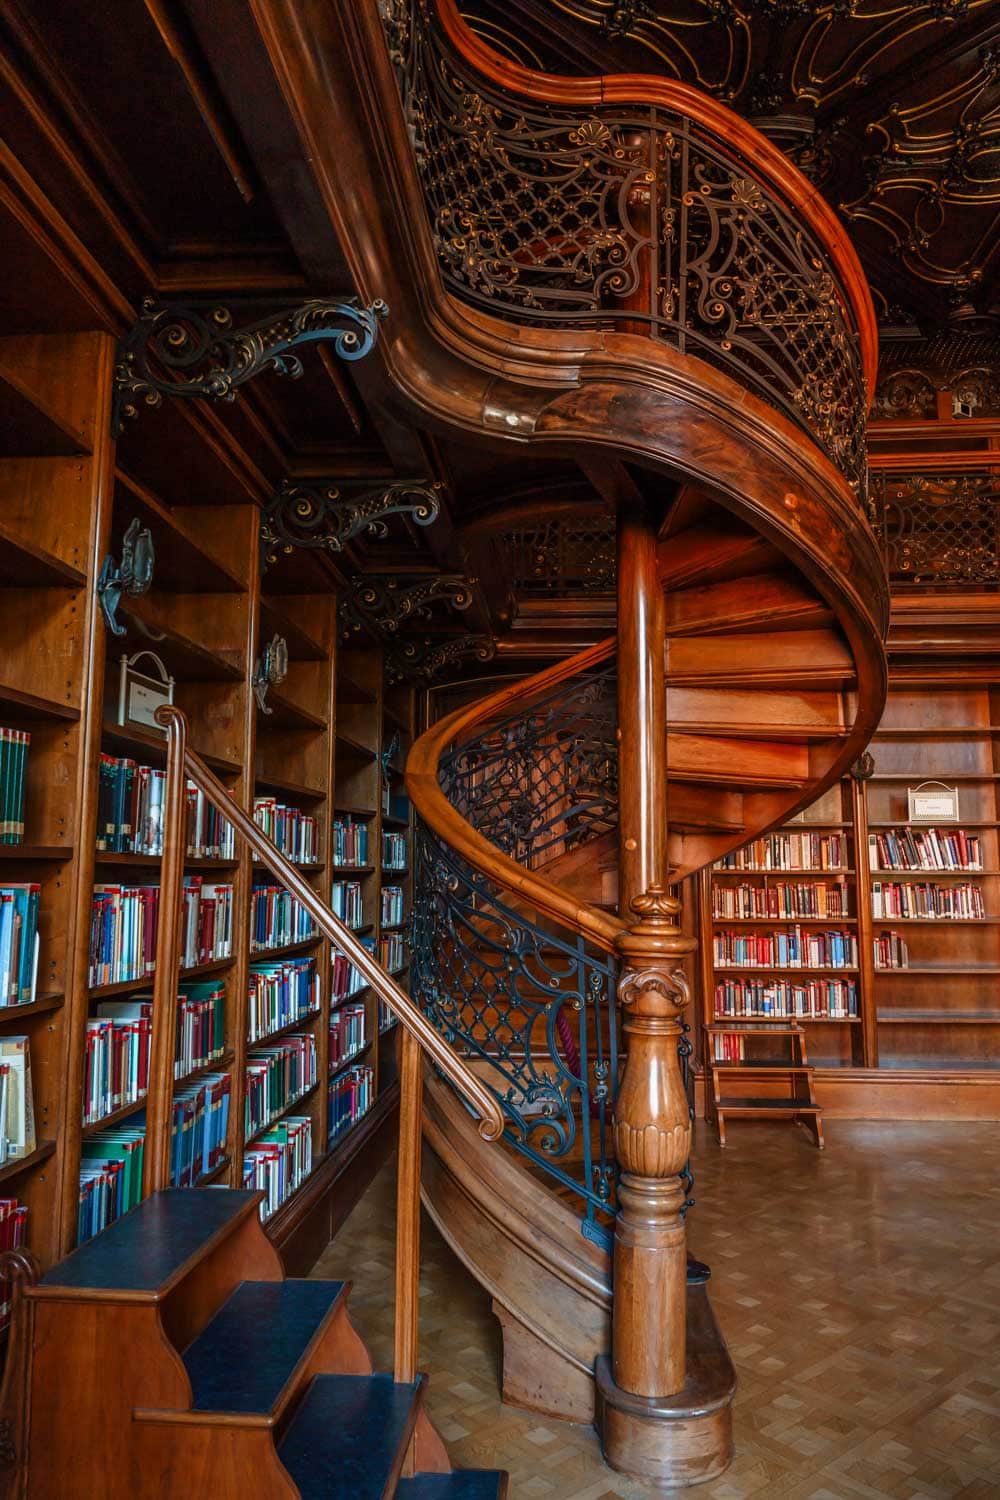 Intricate wooden spiral staircase inside the Ervin Szabo Library, a hidden gem in Budapest.